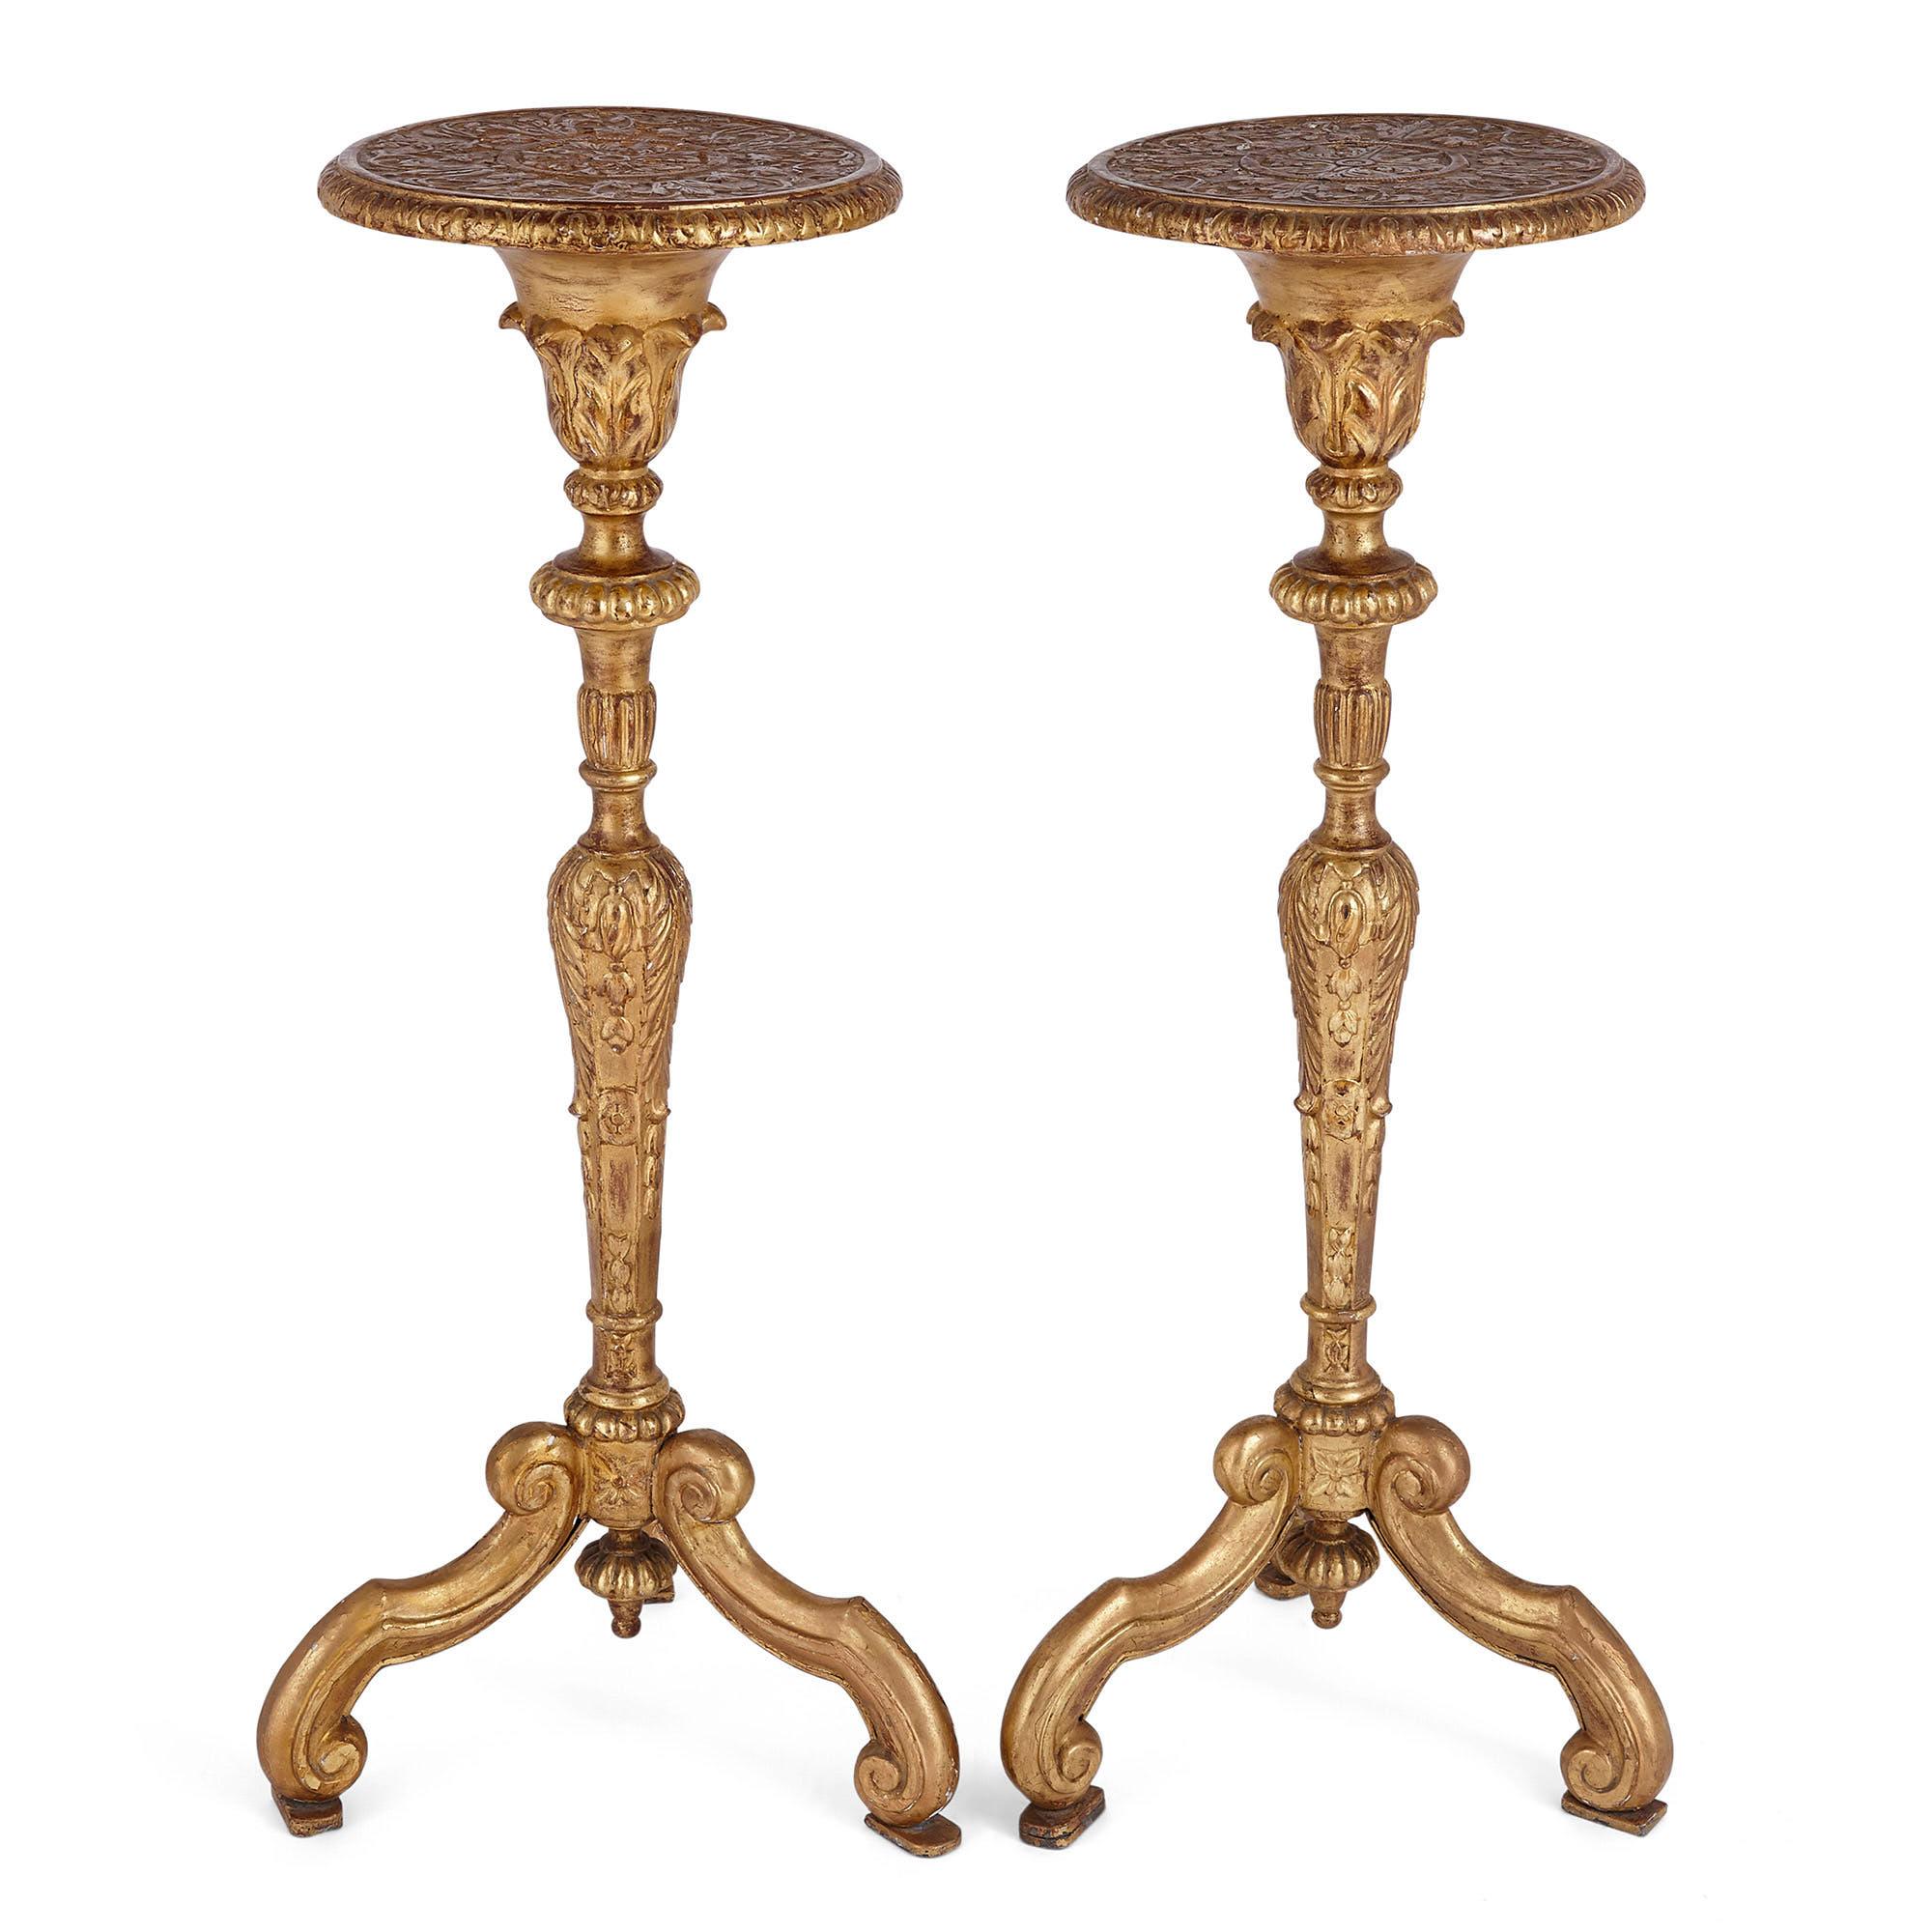 Pair of antique French giltwood torchère stands
French, late 19th century
Measures: Height 90cm, diameter 38cm

This fine pair of torchère stands is a superb example of the Rococo style. Each stand features a tripod base with three scrolled